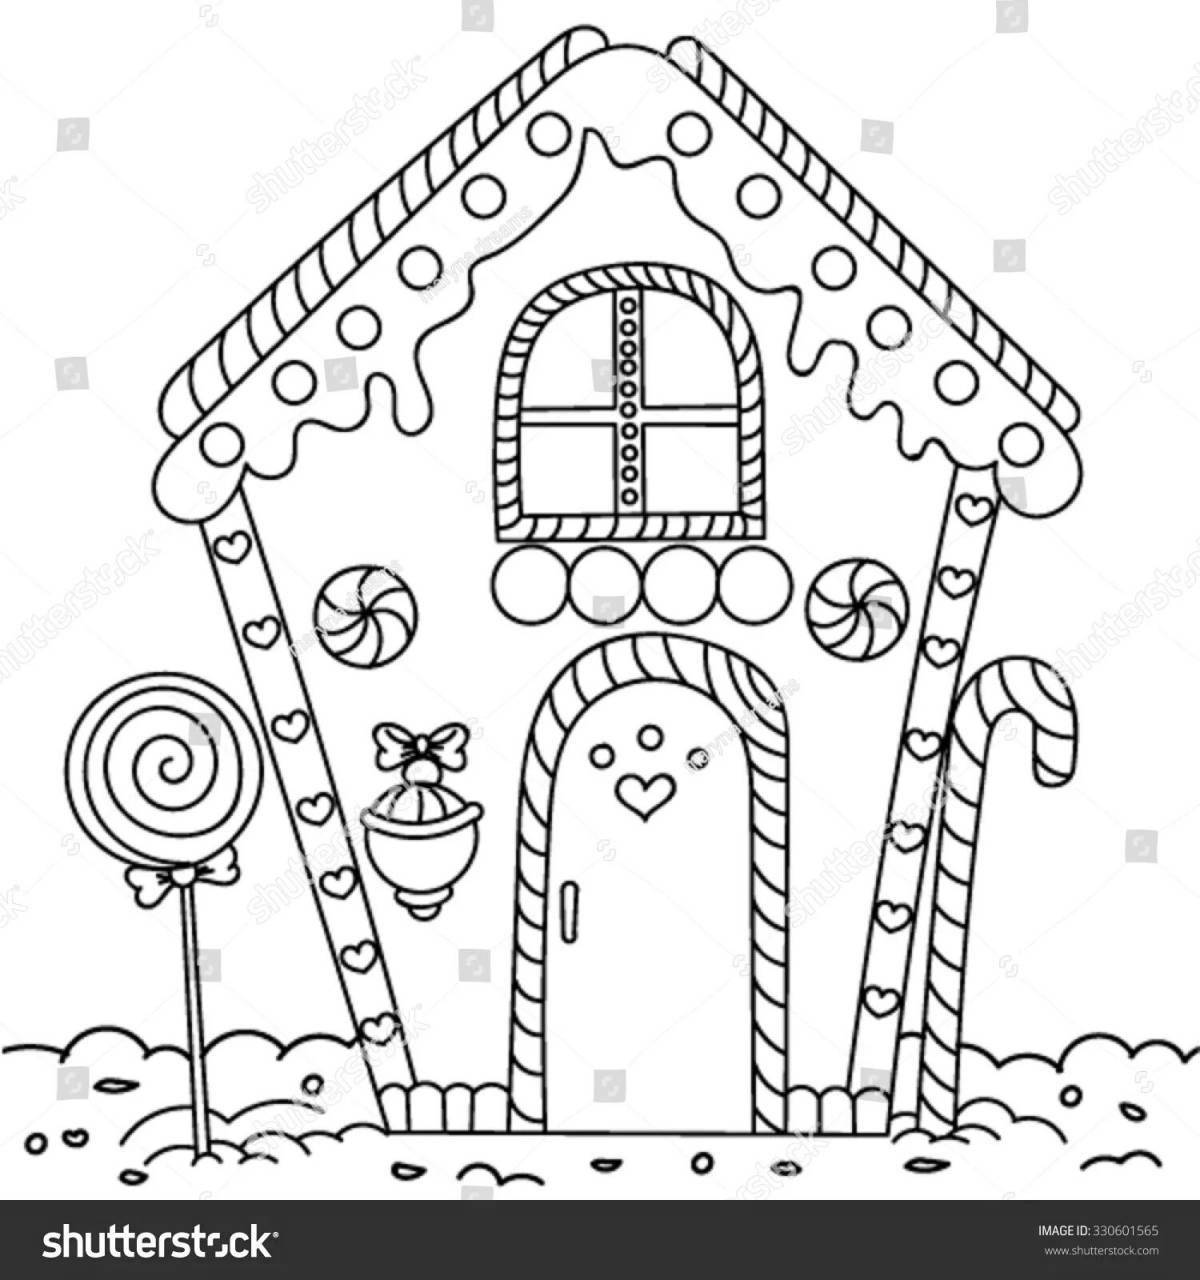 Colorful house coloring book for 2-3 year olds